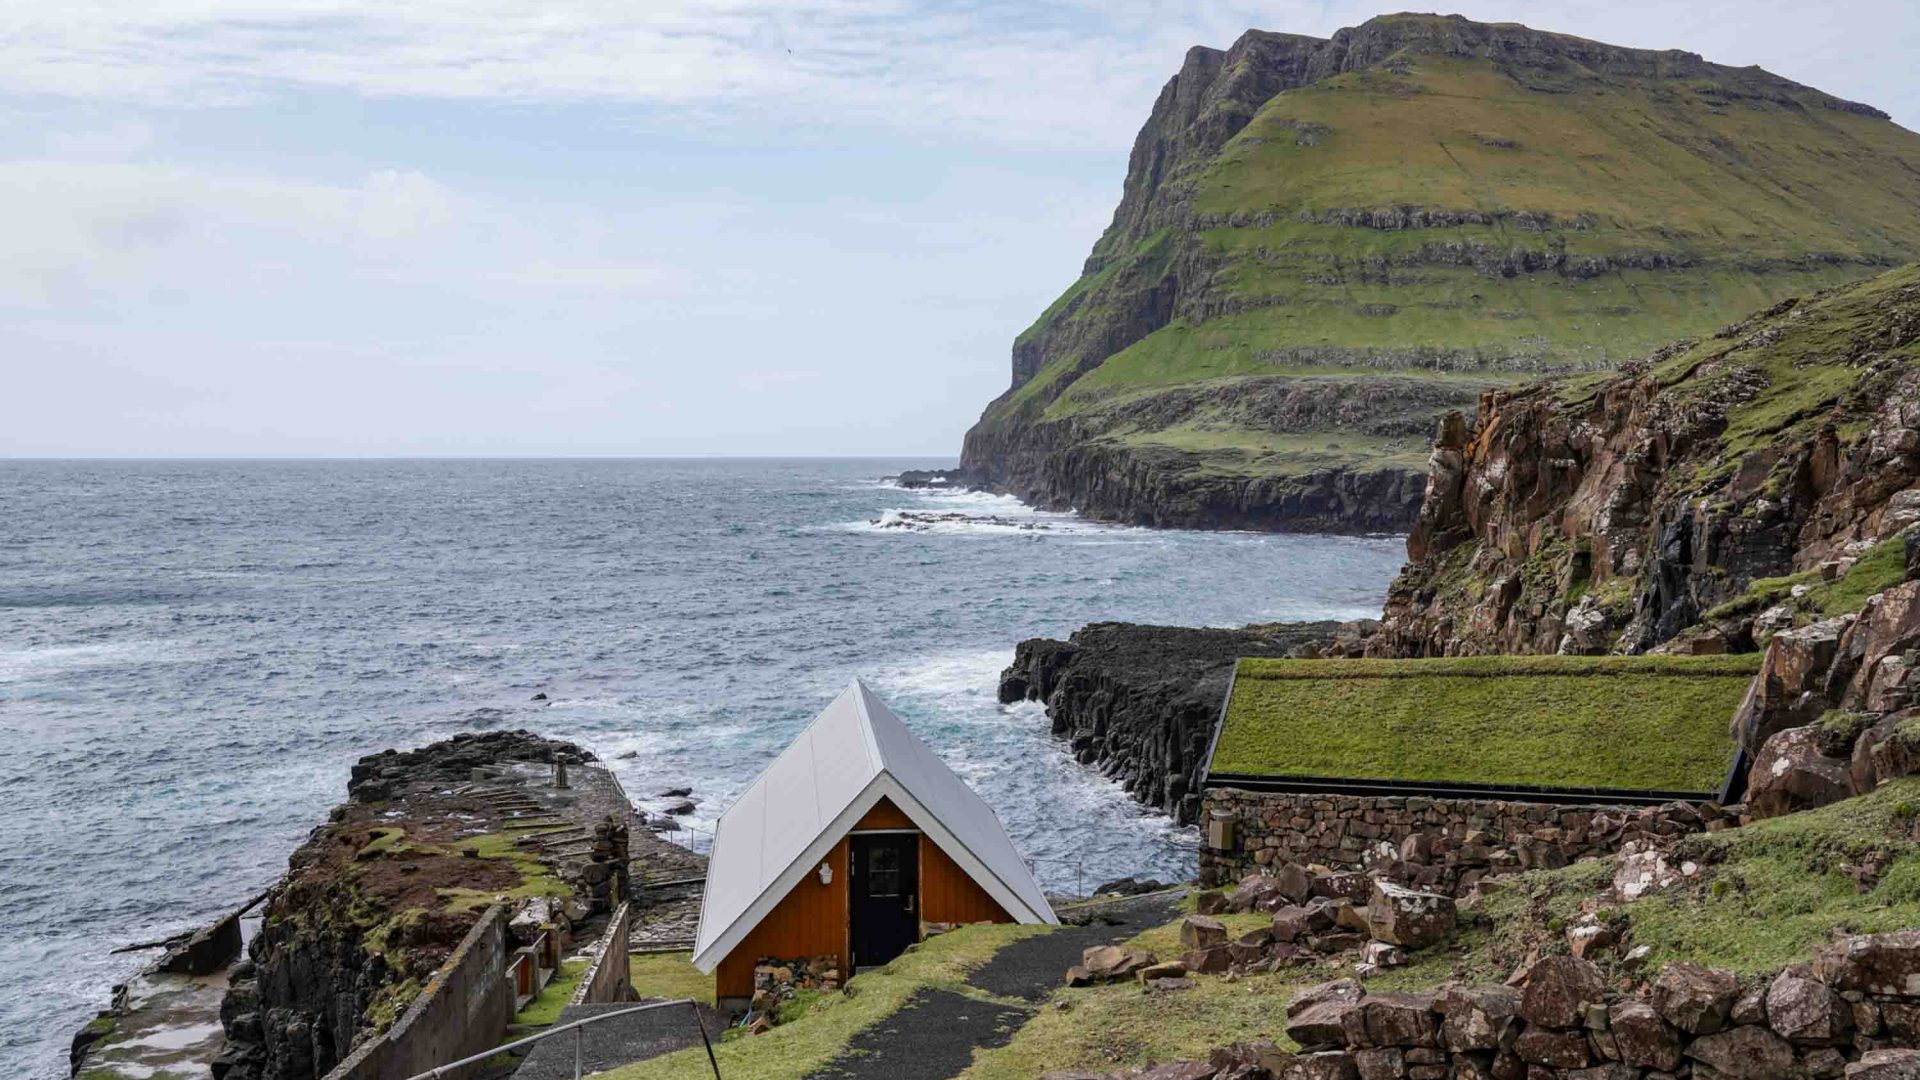 A small building with a steeped roof sits on the edge of green cliffs that drop down to the ocean.